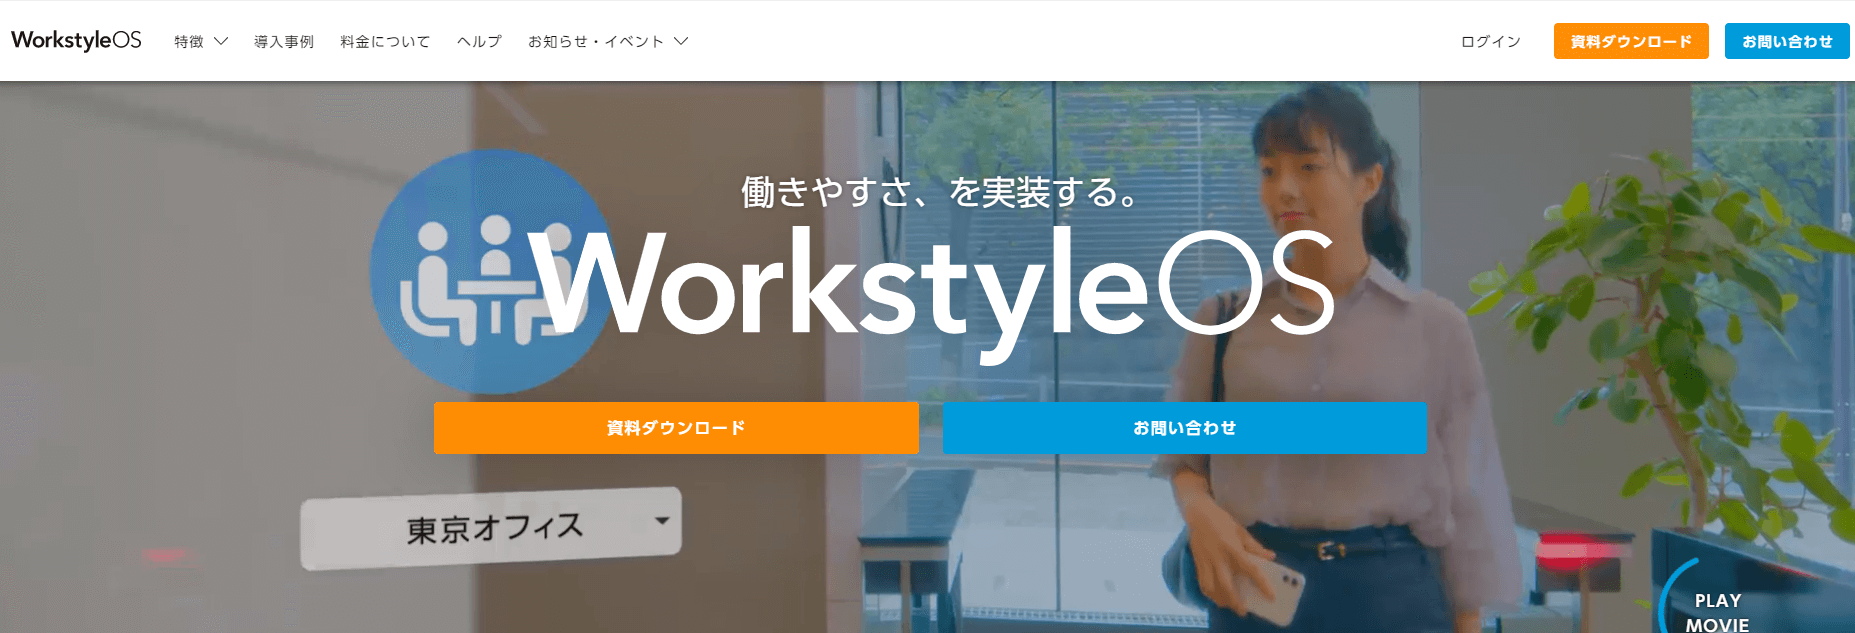 Workstyle OS